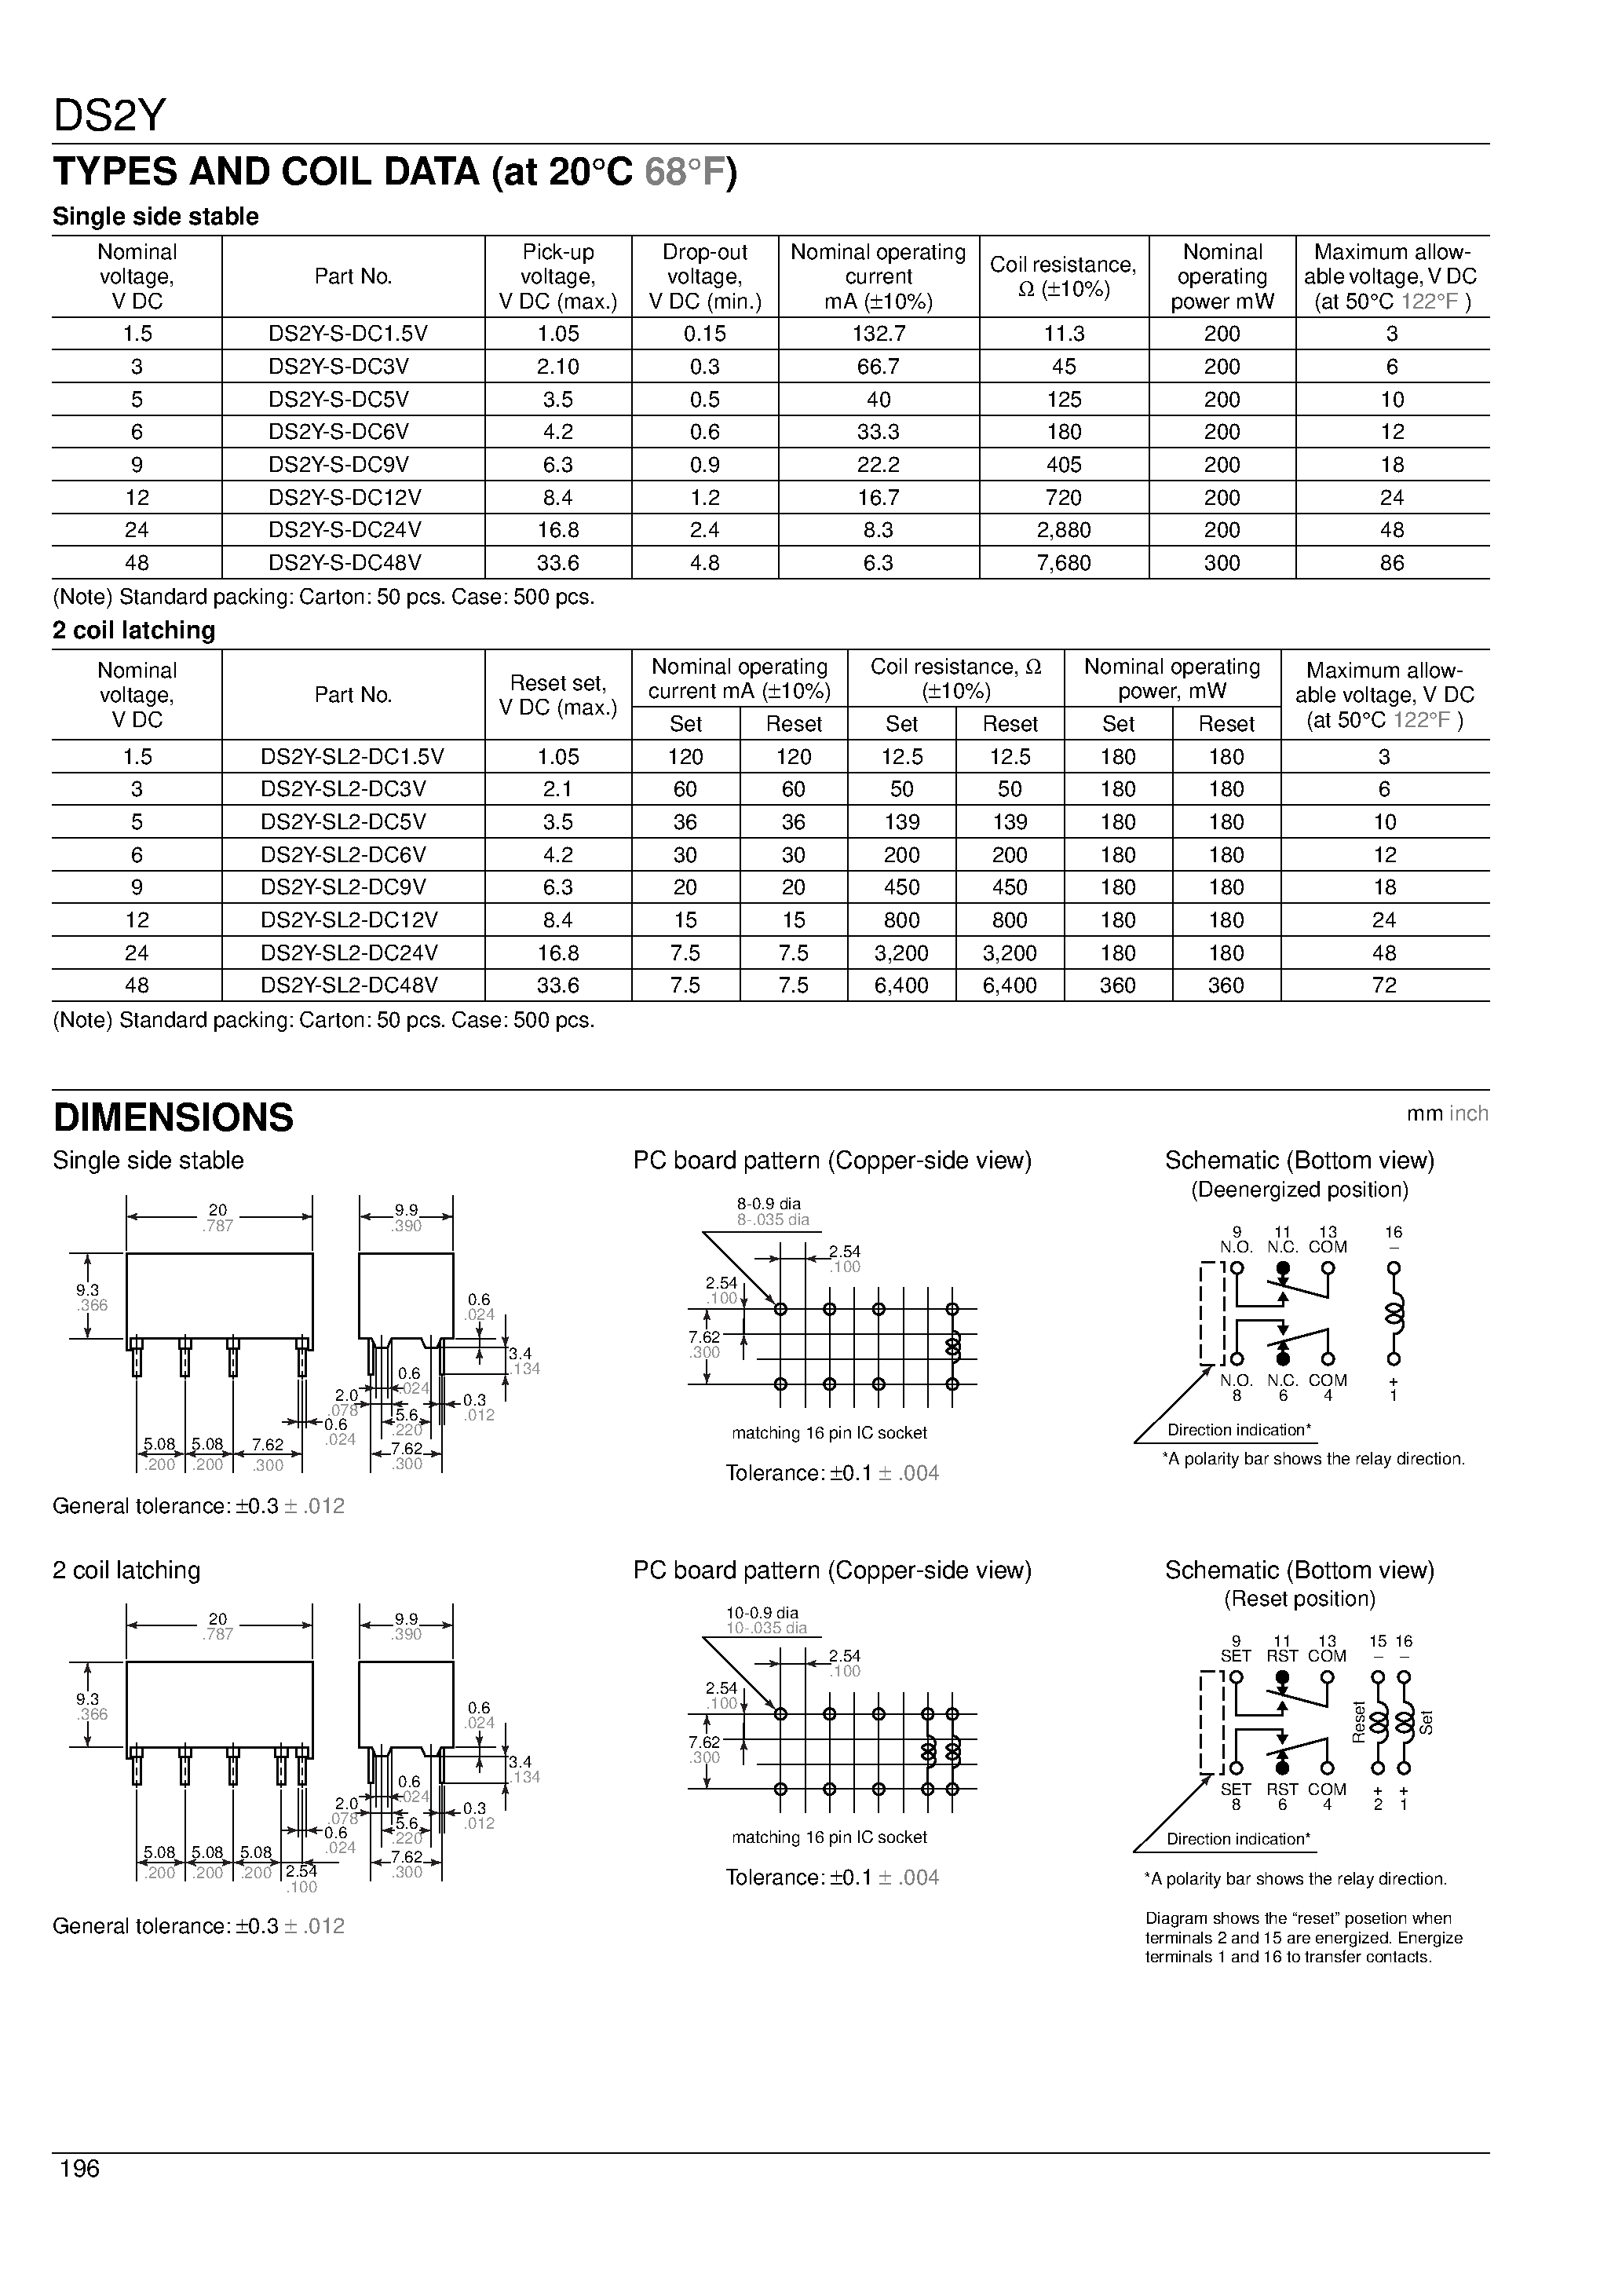 Datasheet DS2Y-SL2-DC3V - 2 Form C contact High sensitivity-200 mW nominal operating power page 2